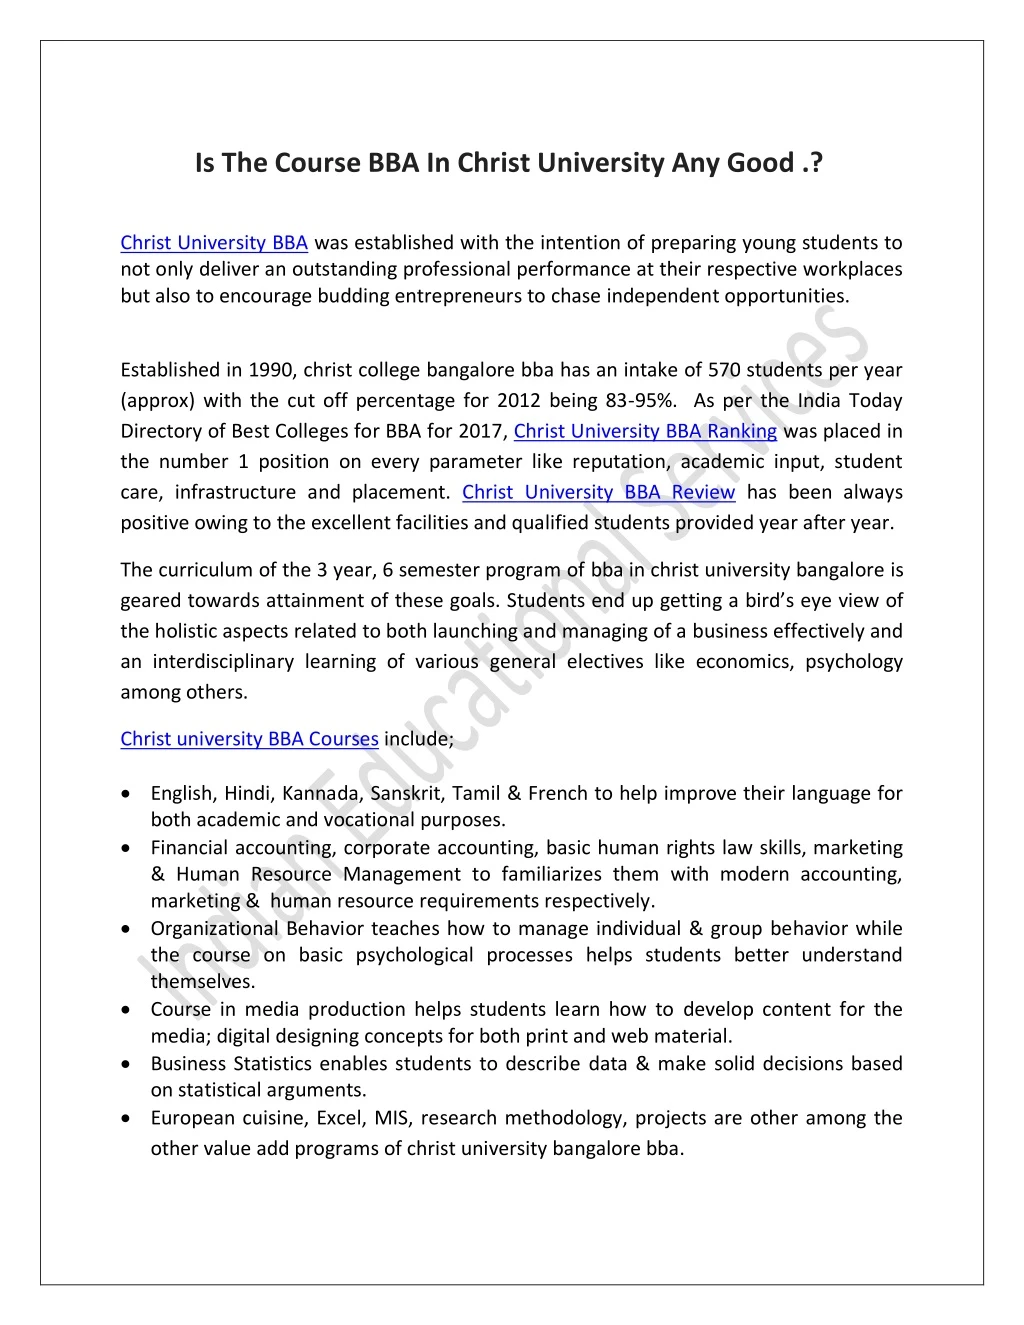 is the course bba in christ university any good